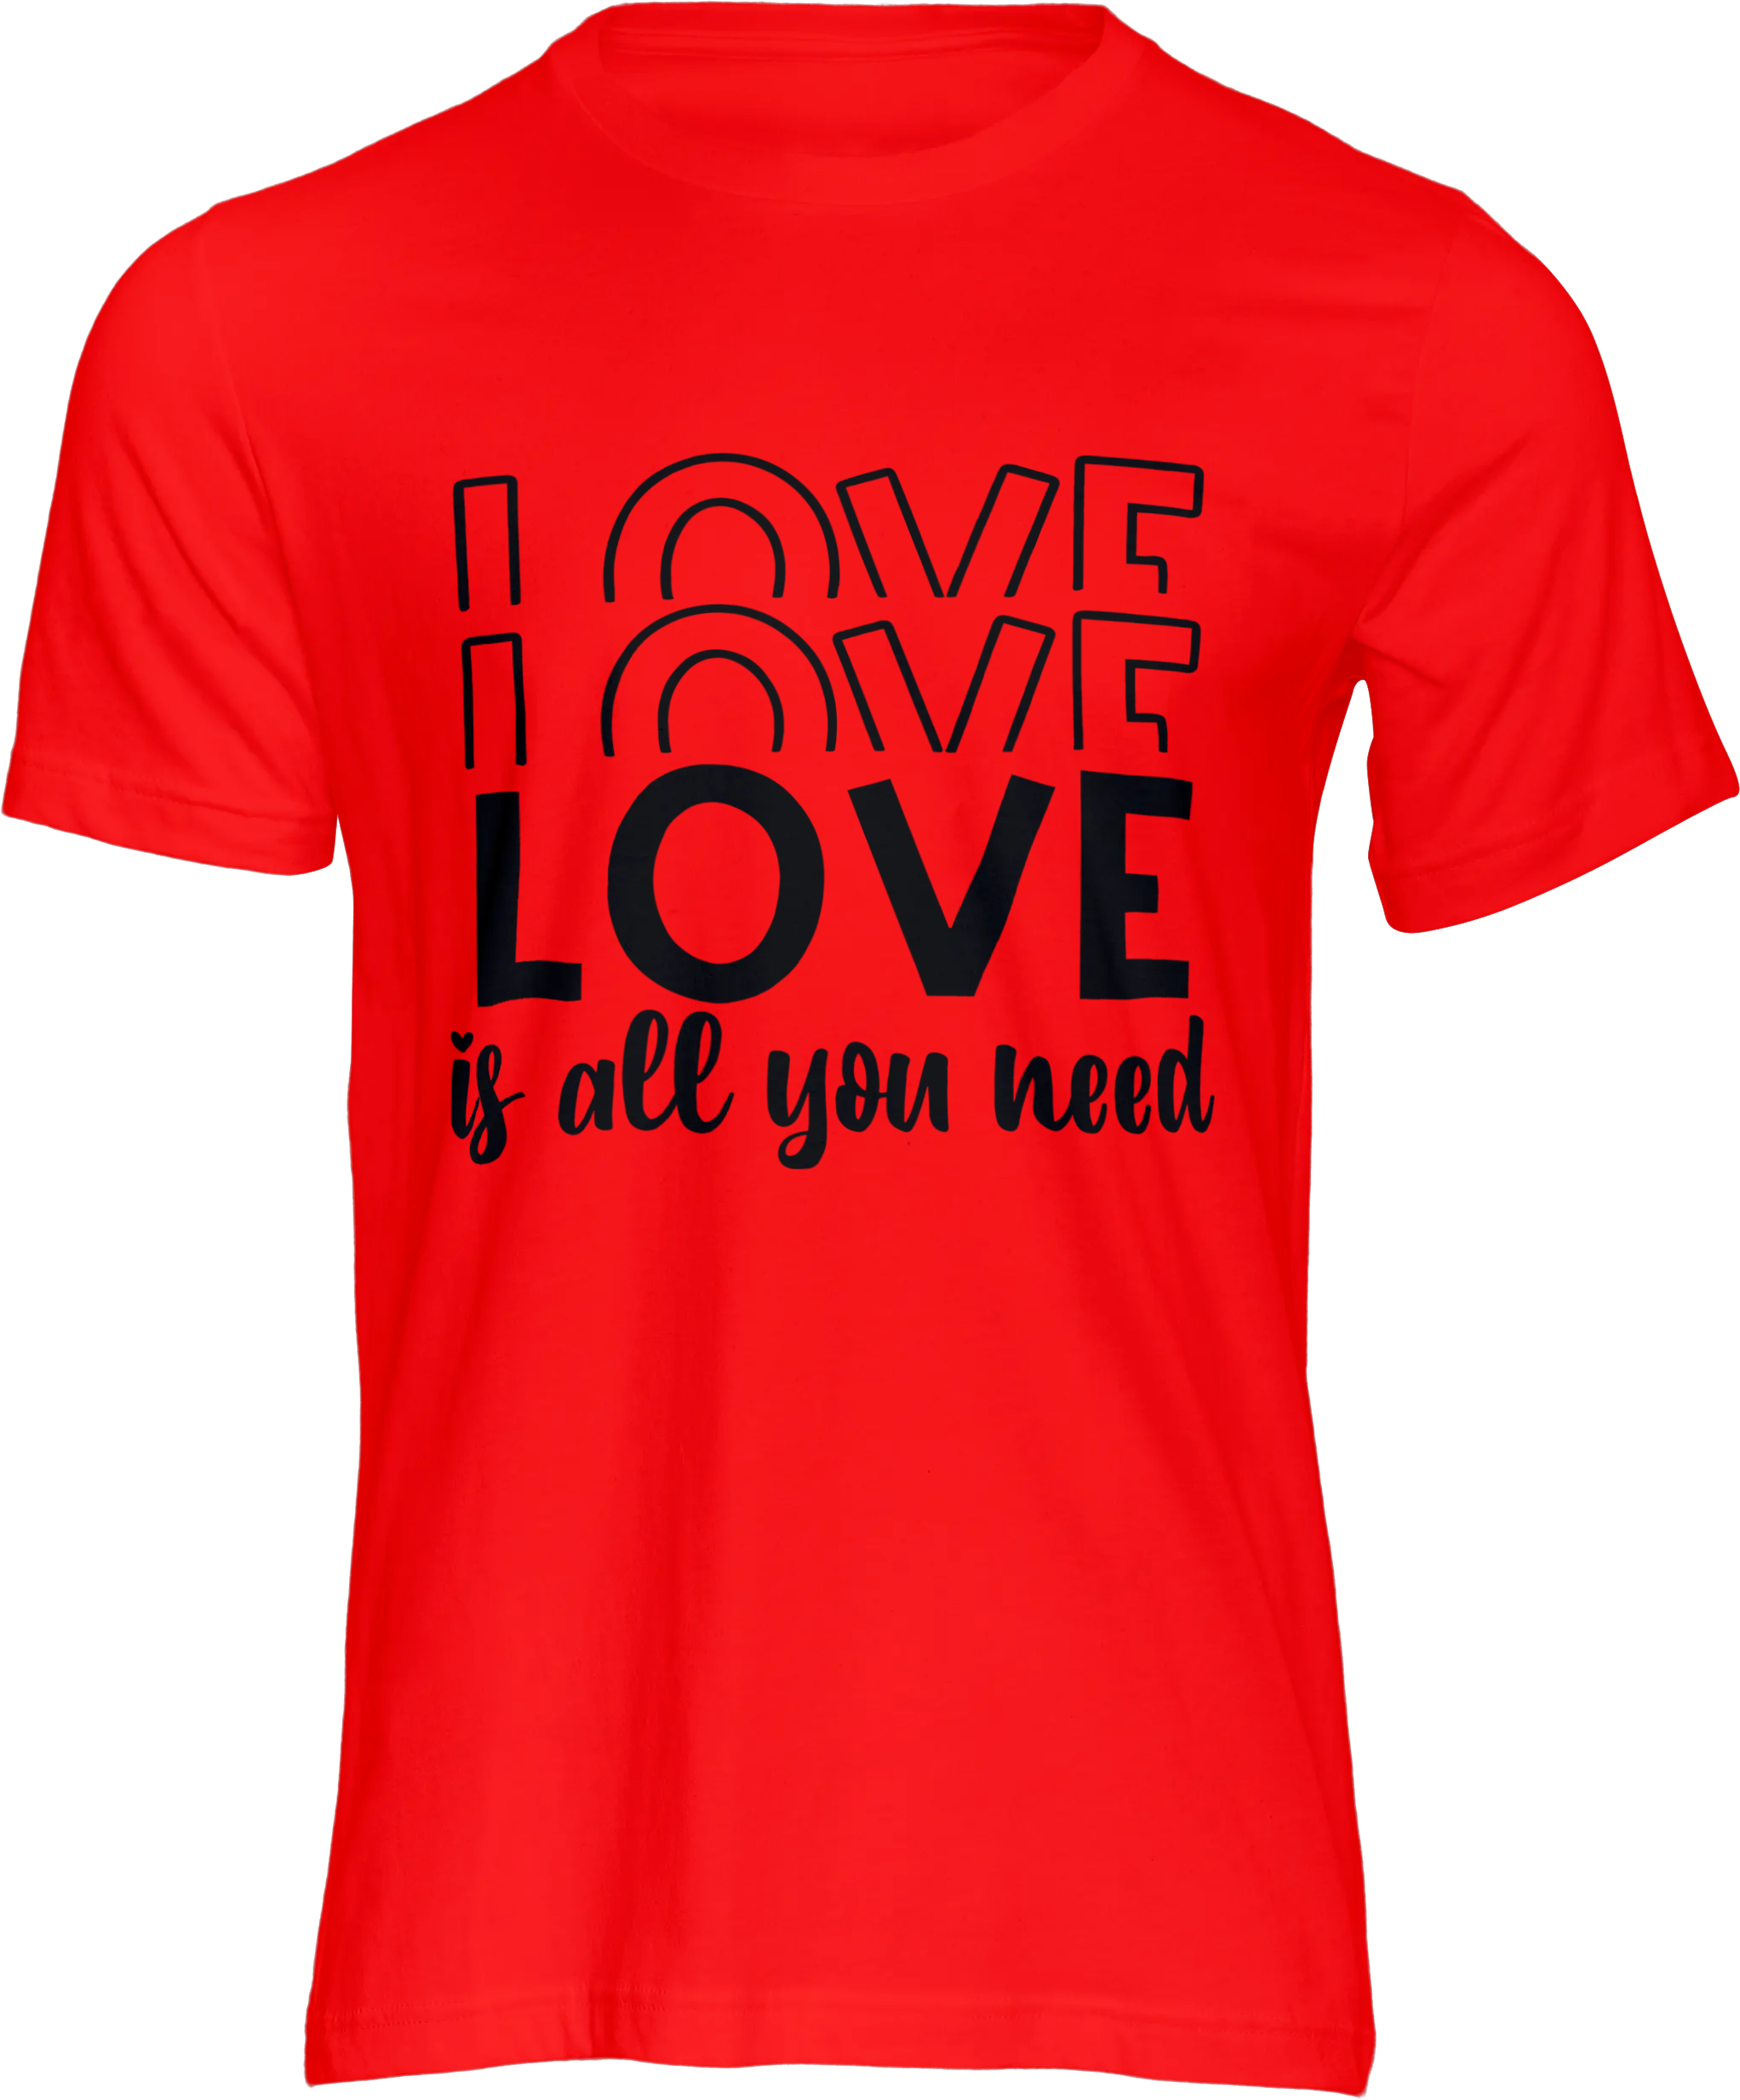 LOVE IS ALL YOU NEED T-SHIRT